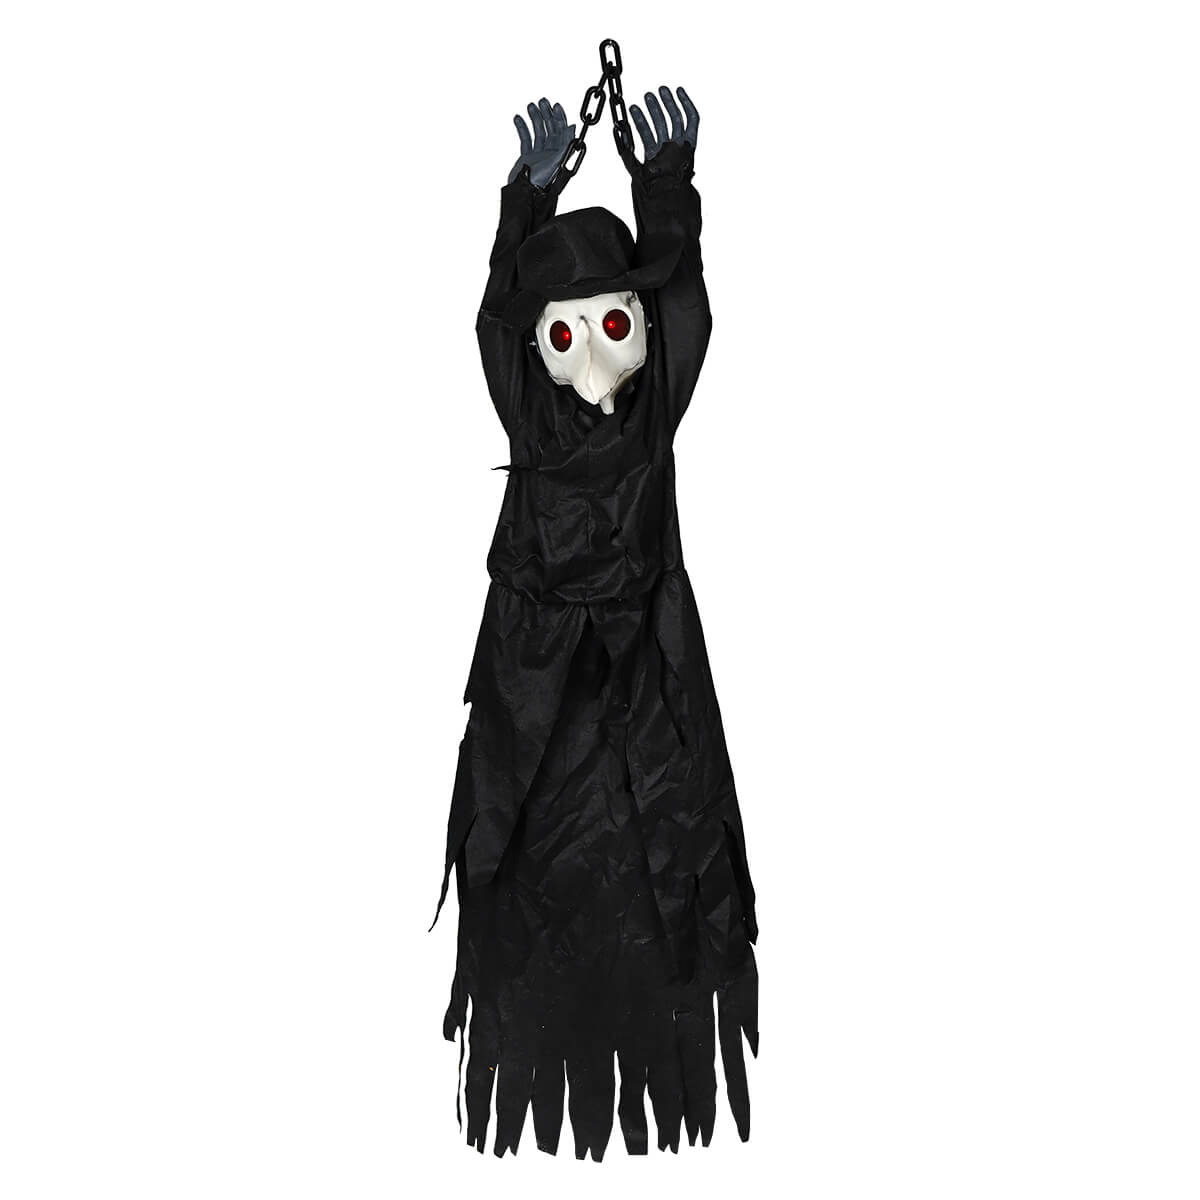 Lighted Animated Halloween Hanging Plague Doctor Decor